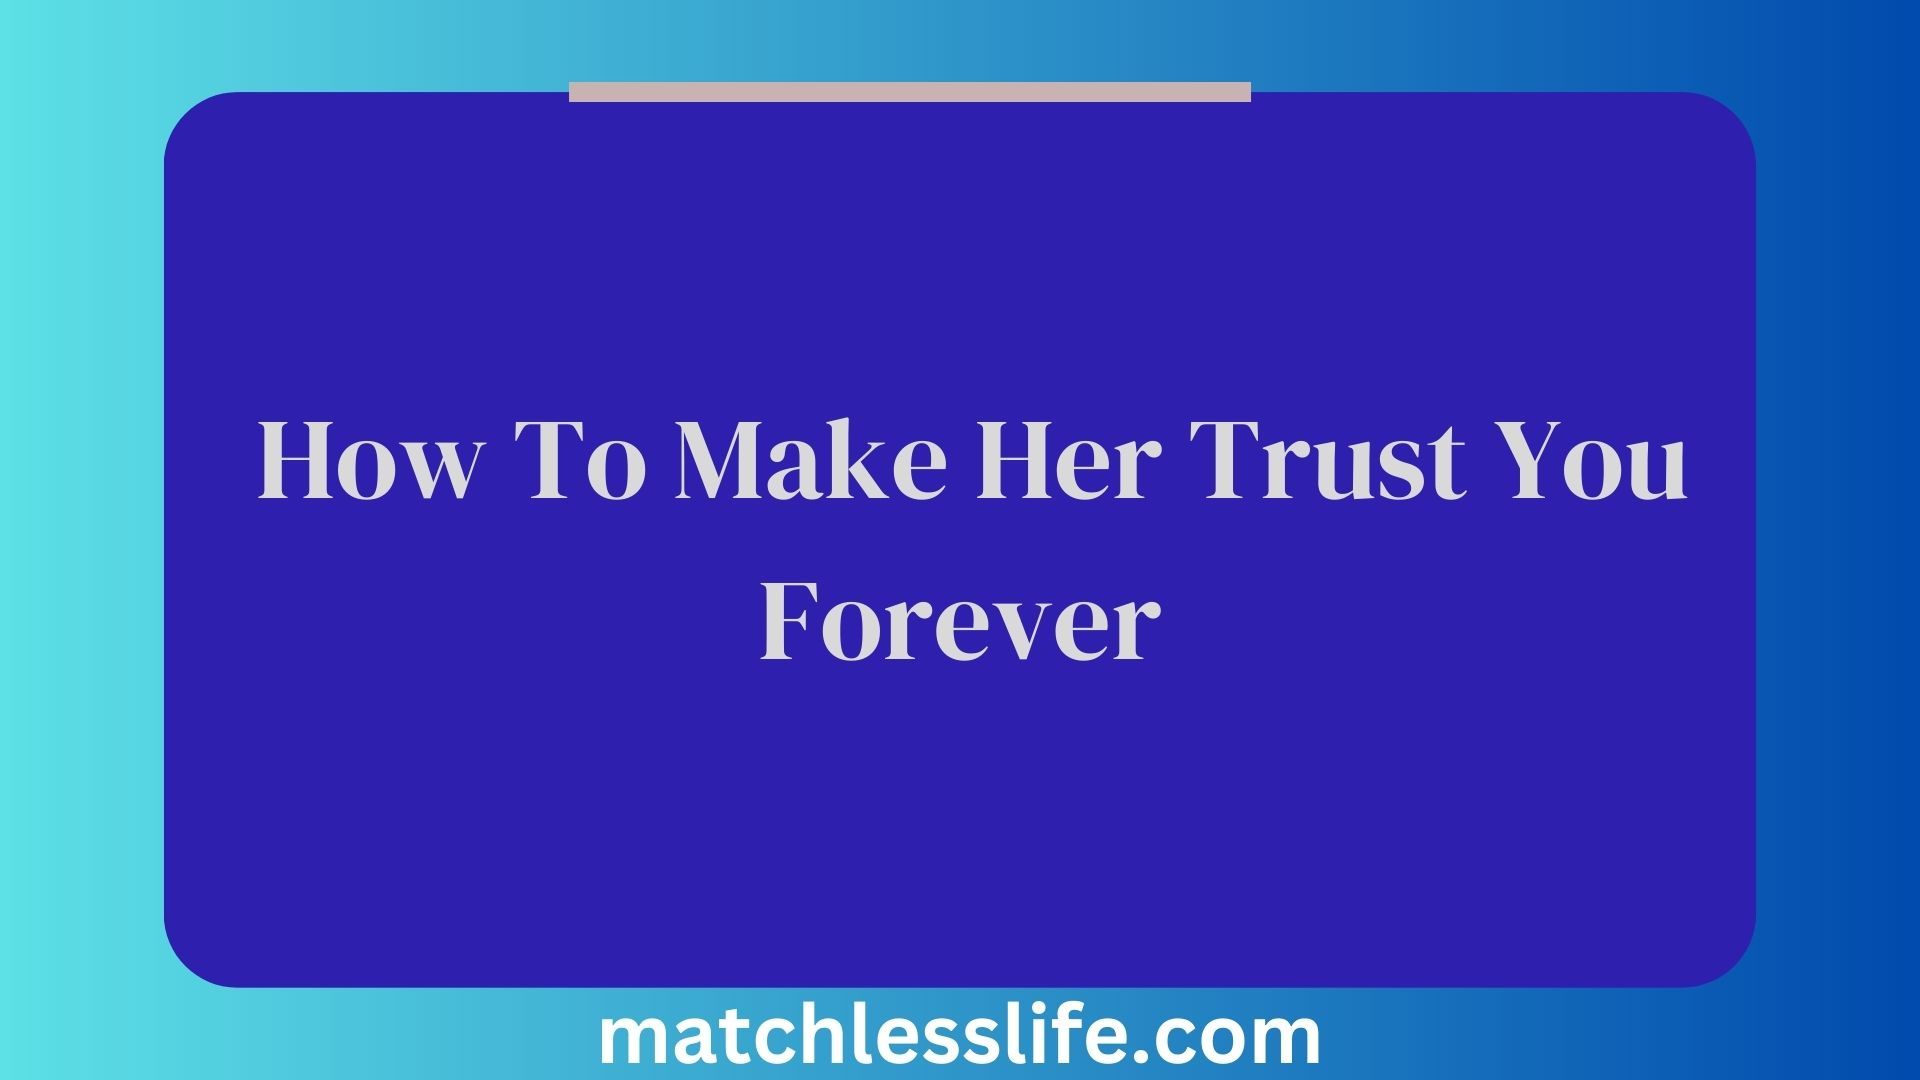 How To Make Her Trust You Forever